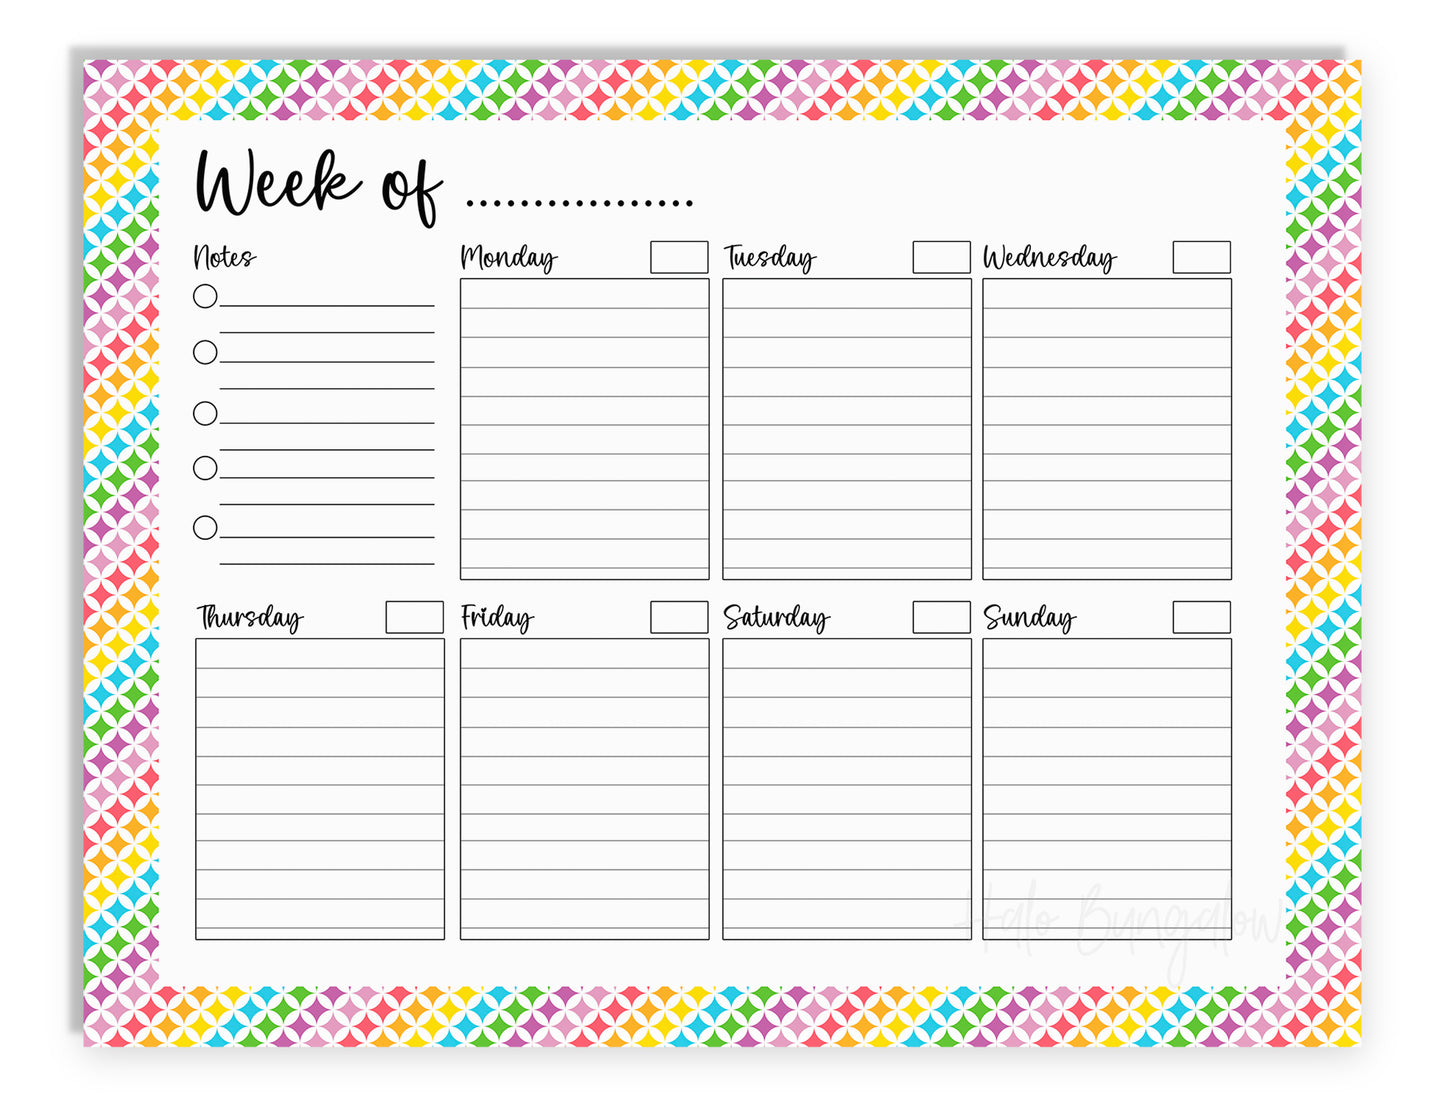 NP116 - NOTEPAD - BRIGHT BURSTS WEEKLY PLANNER NOTEPAD